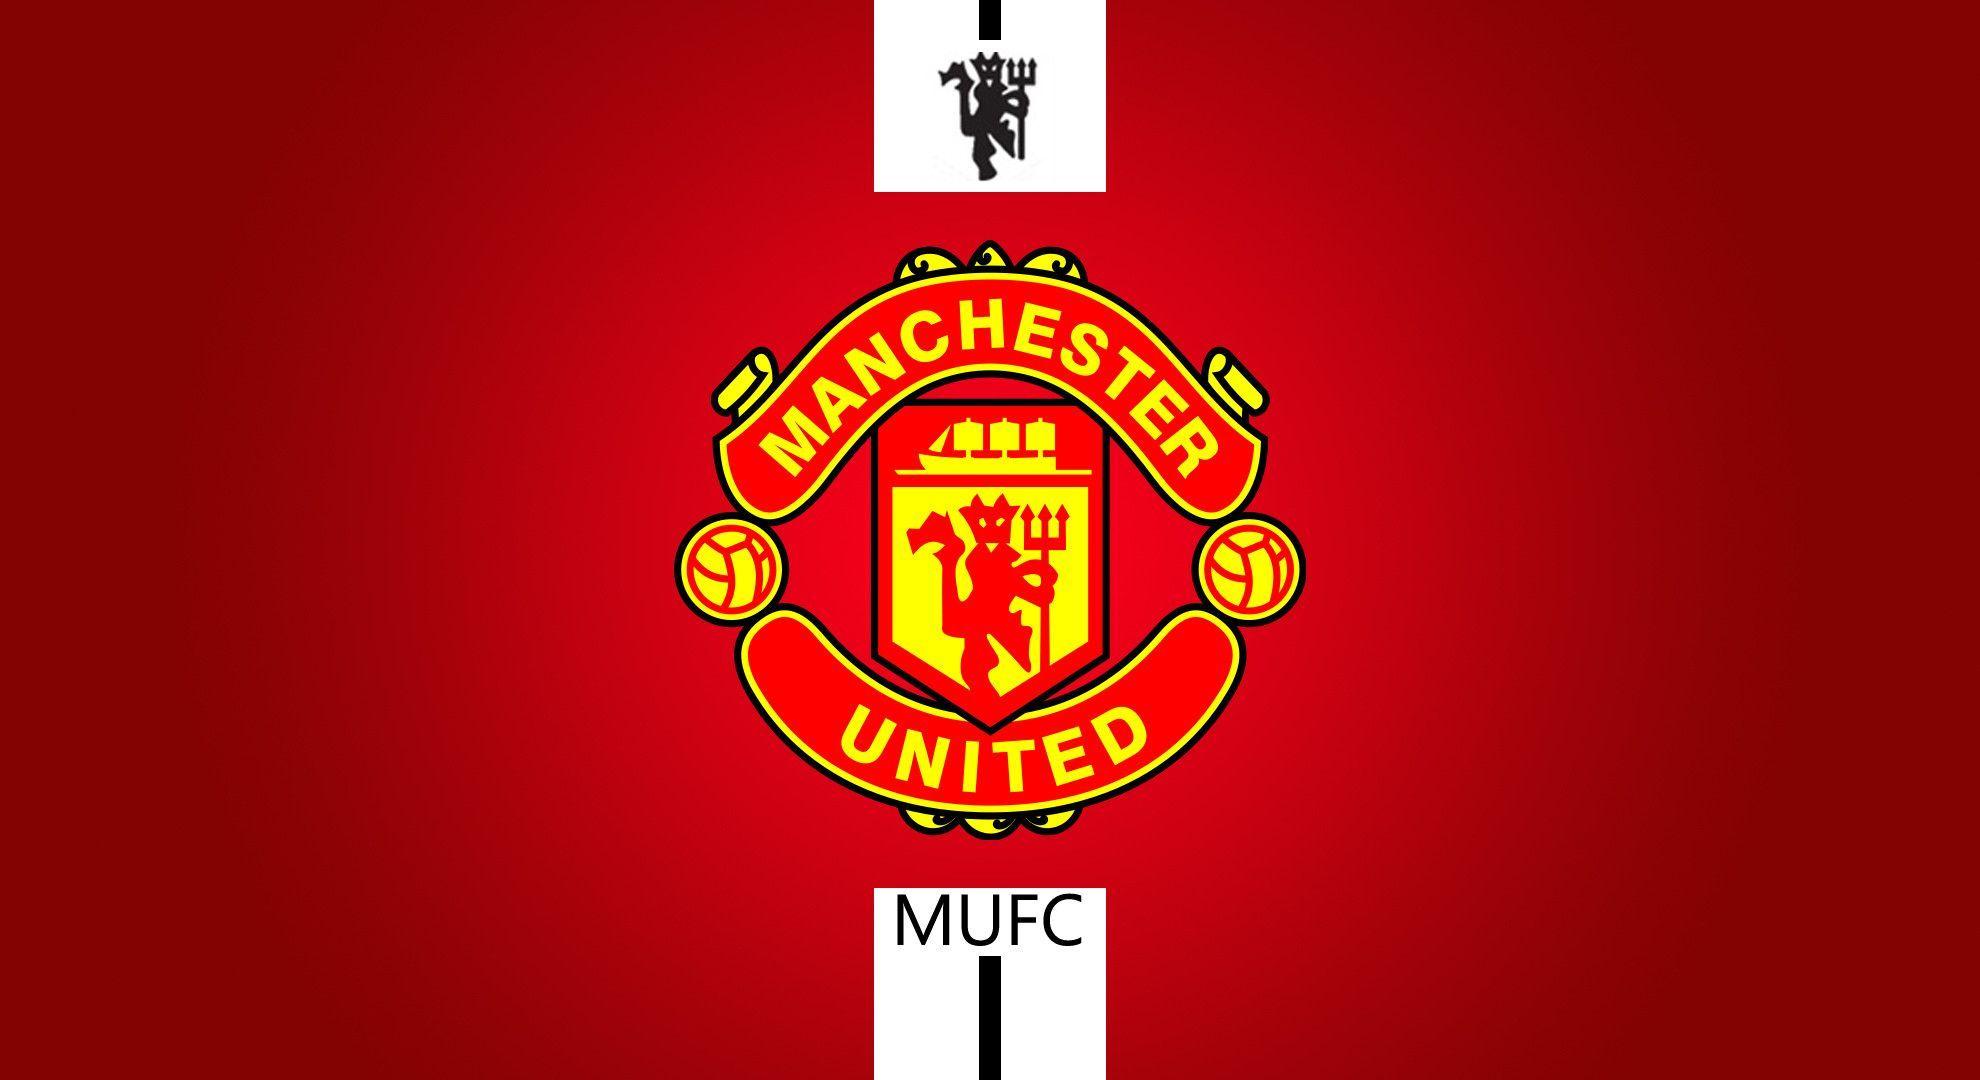 New Manchester United Logo Full HD Wallpaper Just another High